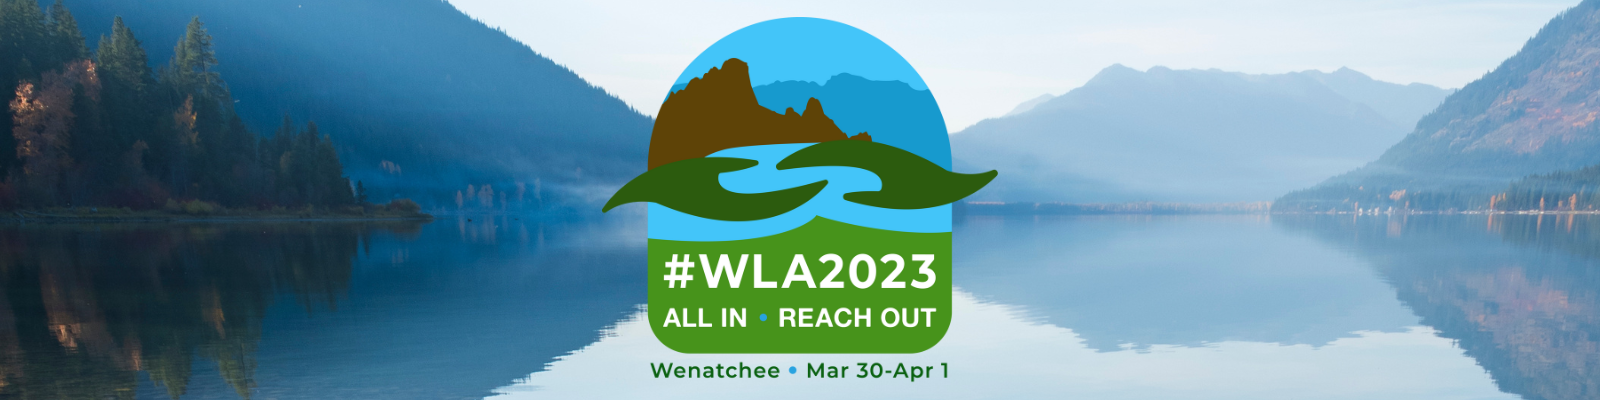 The WLA2023 logo set against the image of a lake